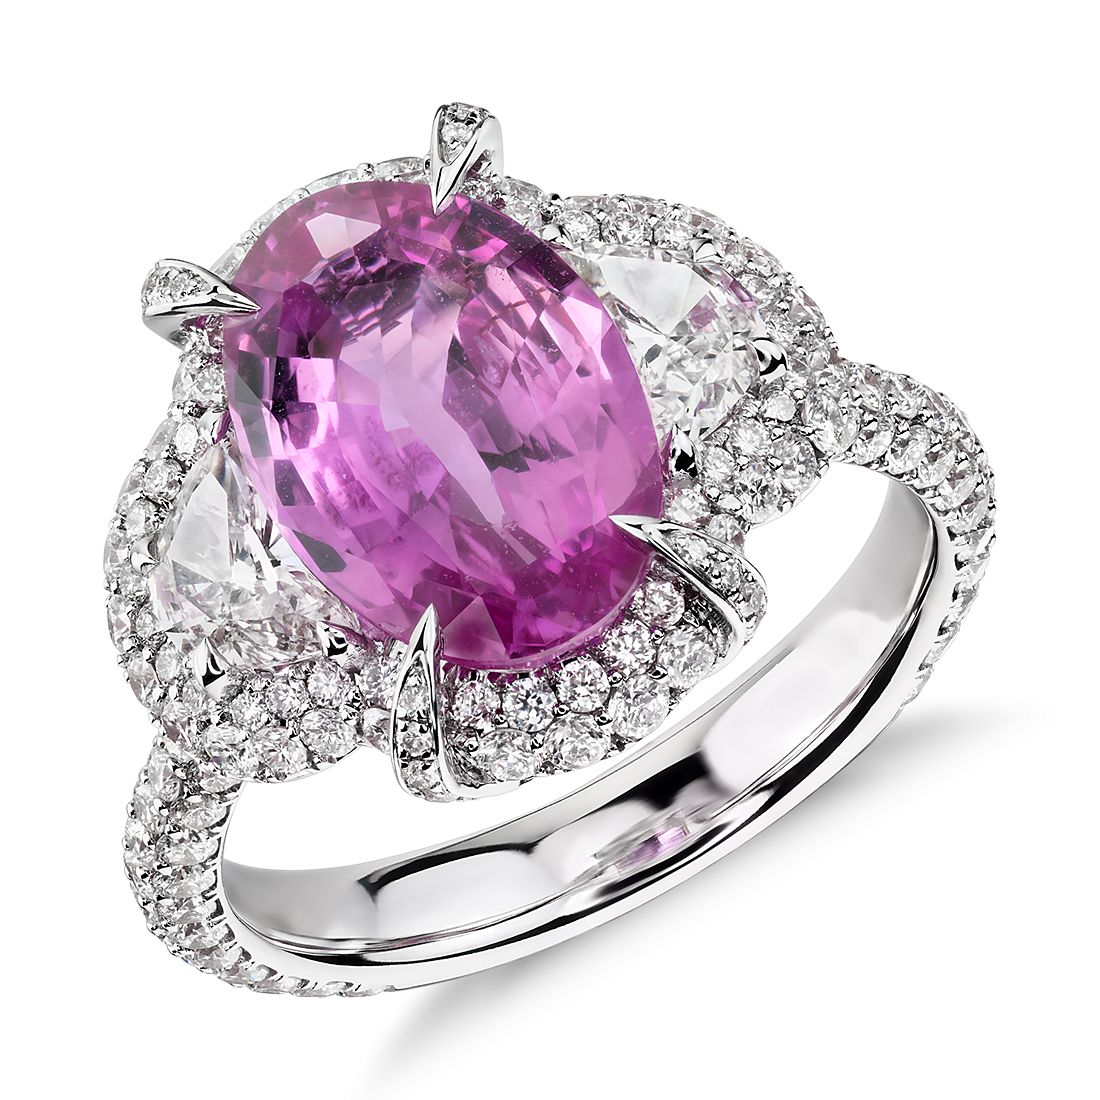 Pink Sapphire and Diamond Halo Ring in 18k White Gold (3.44 ct. center)